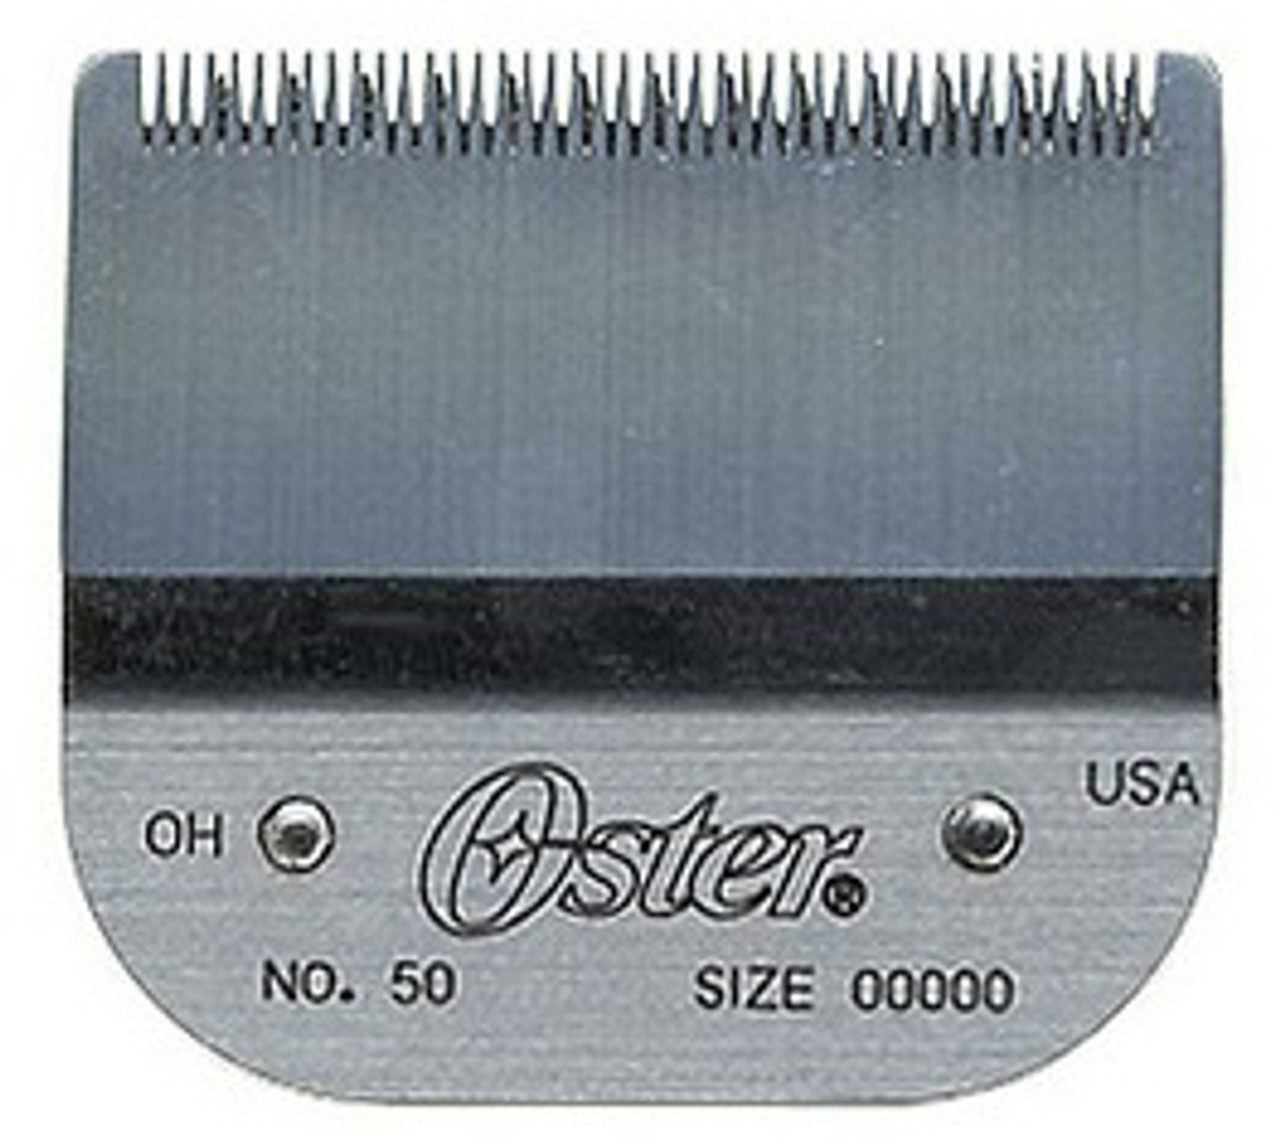 oster 00000 clipper female head shave video